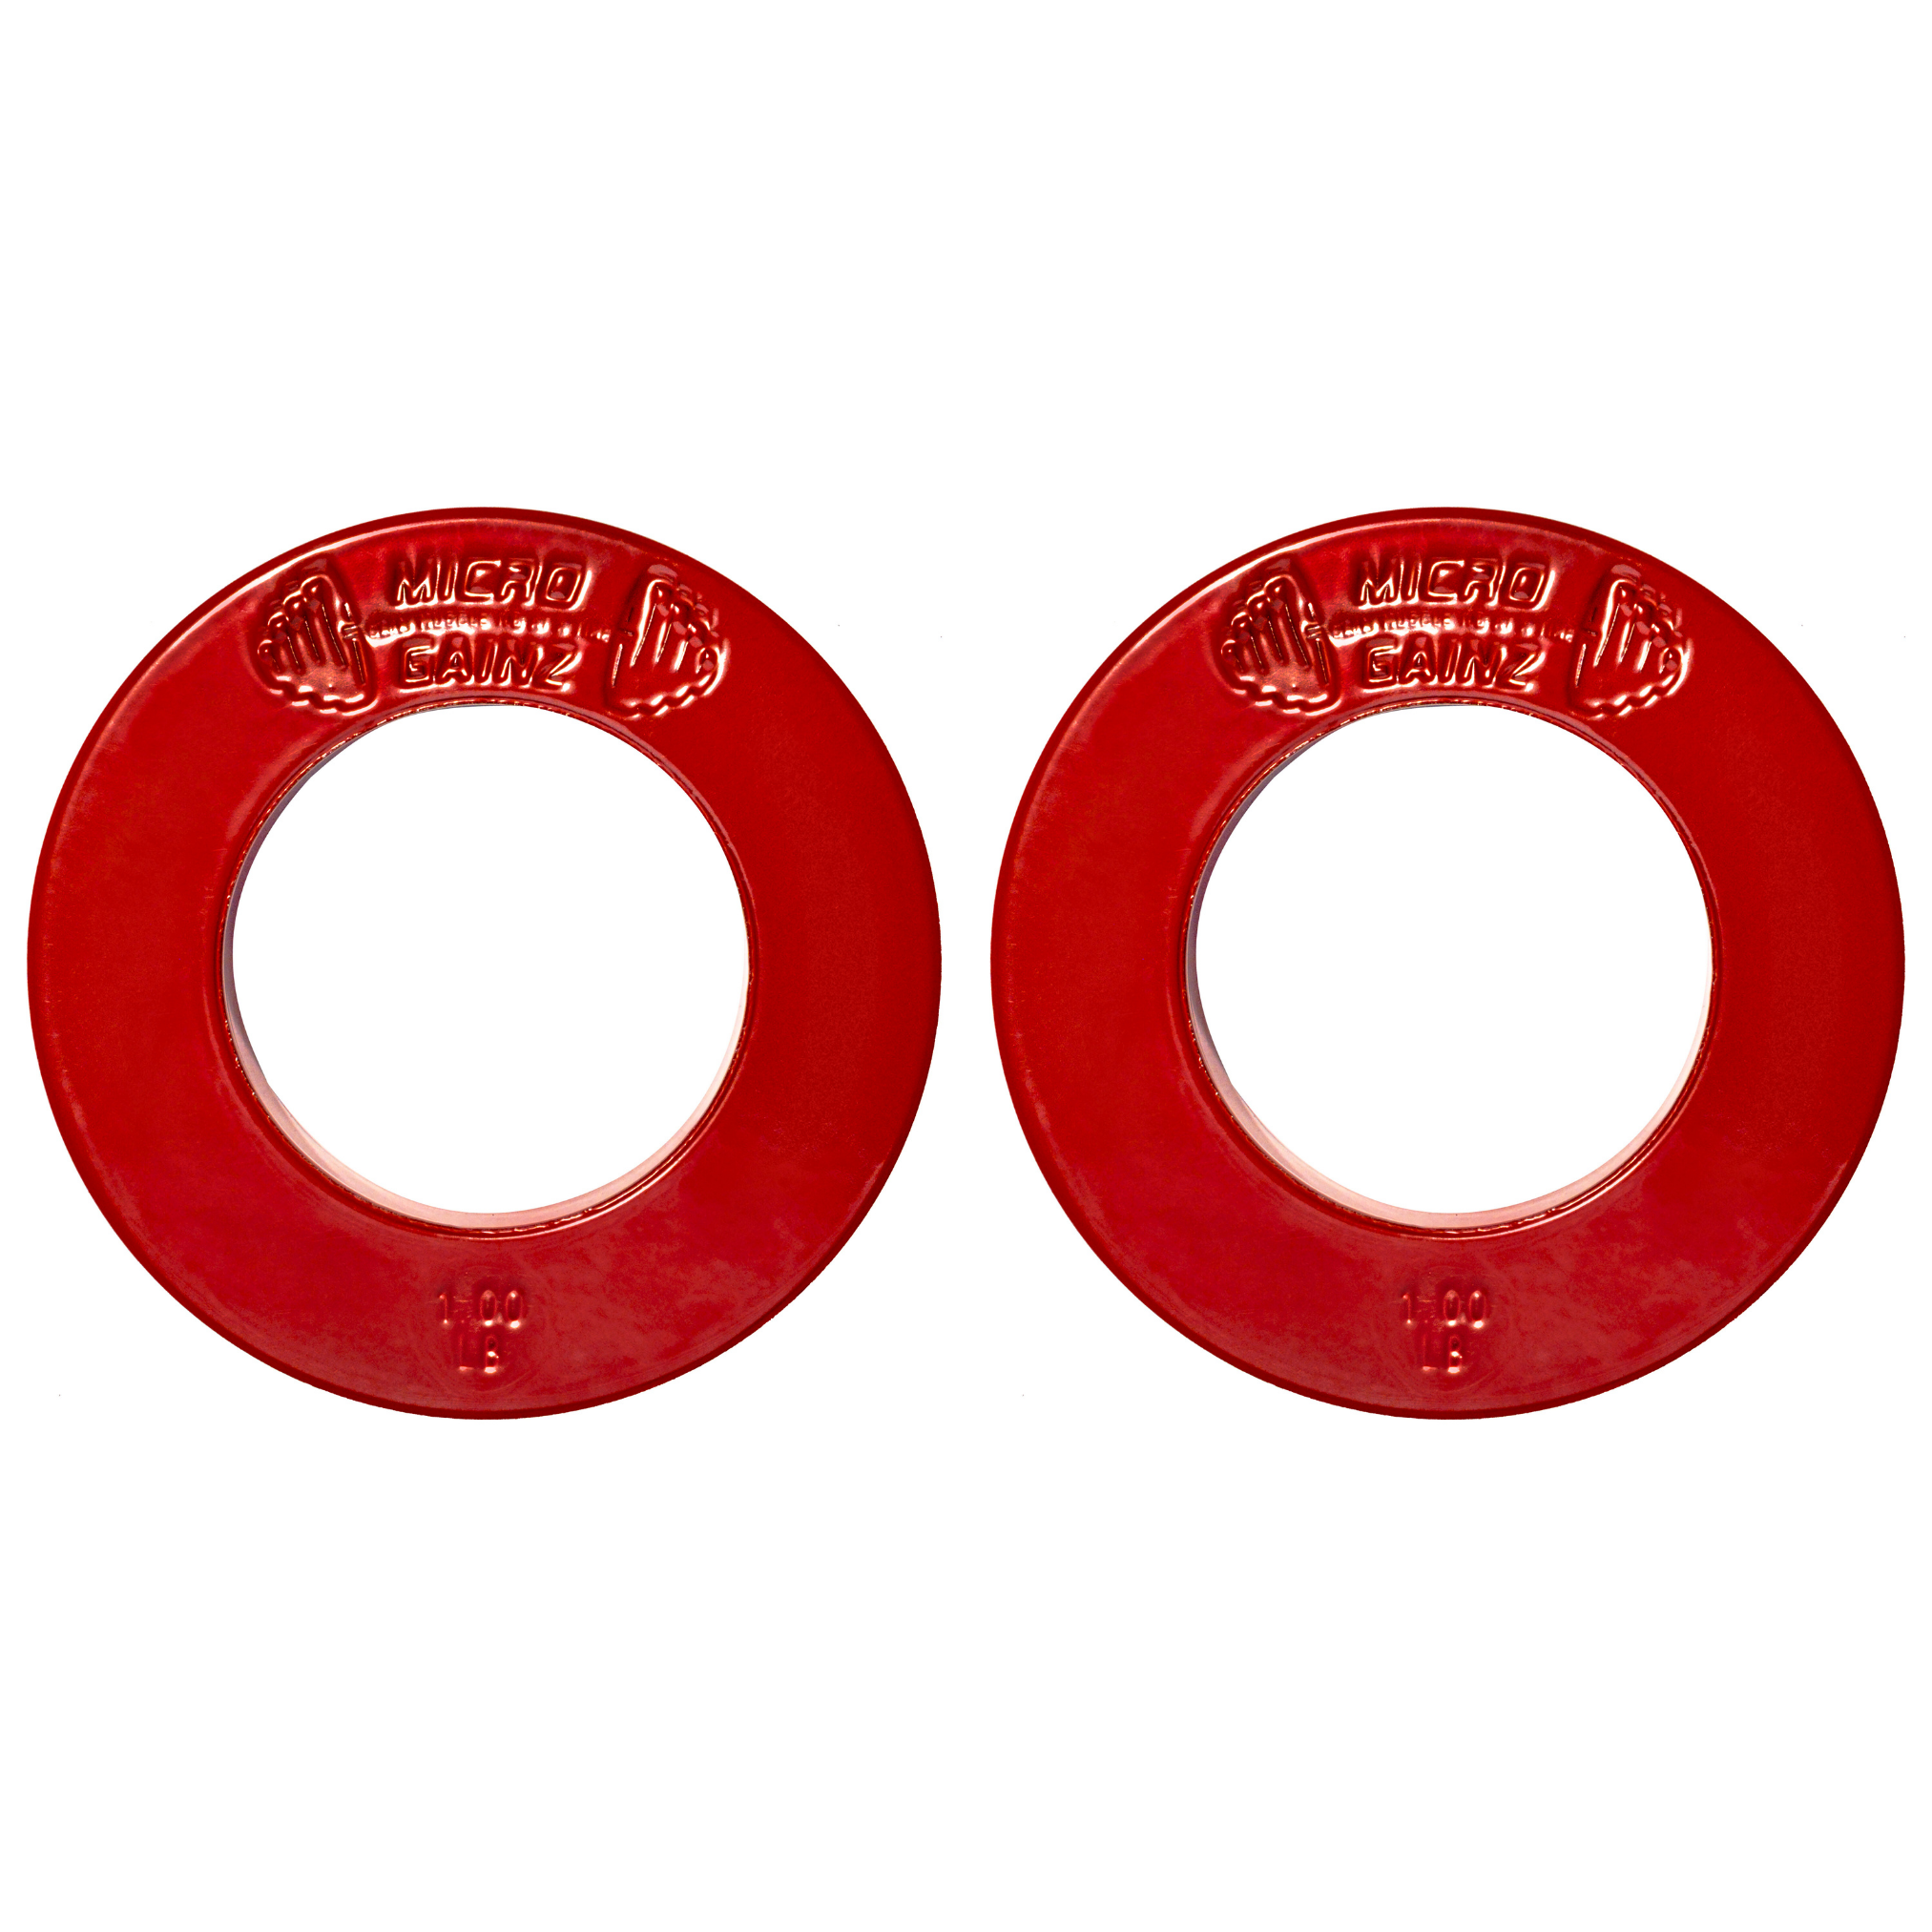 Micro Gainz Olympic Size Fractional Weight Plates Pair of Red 1LB Plates